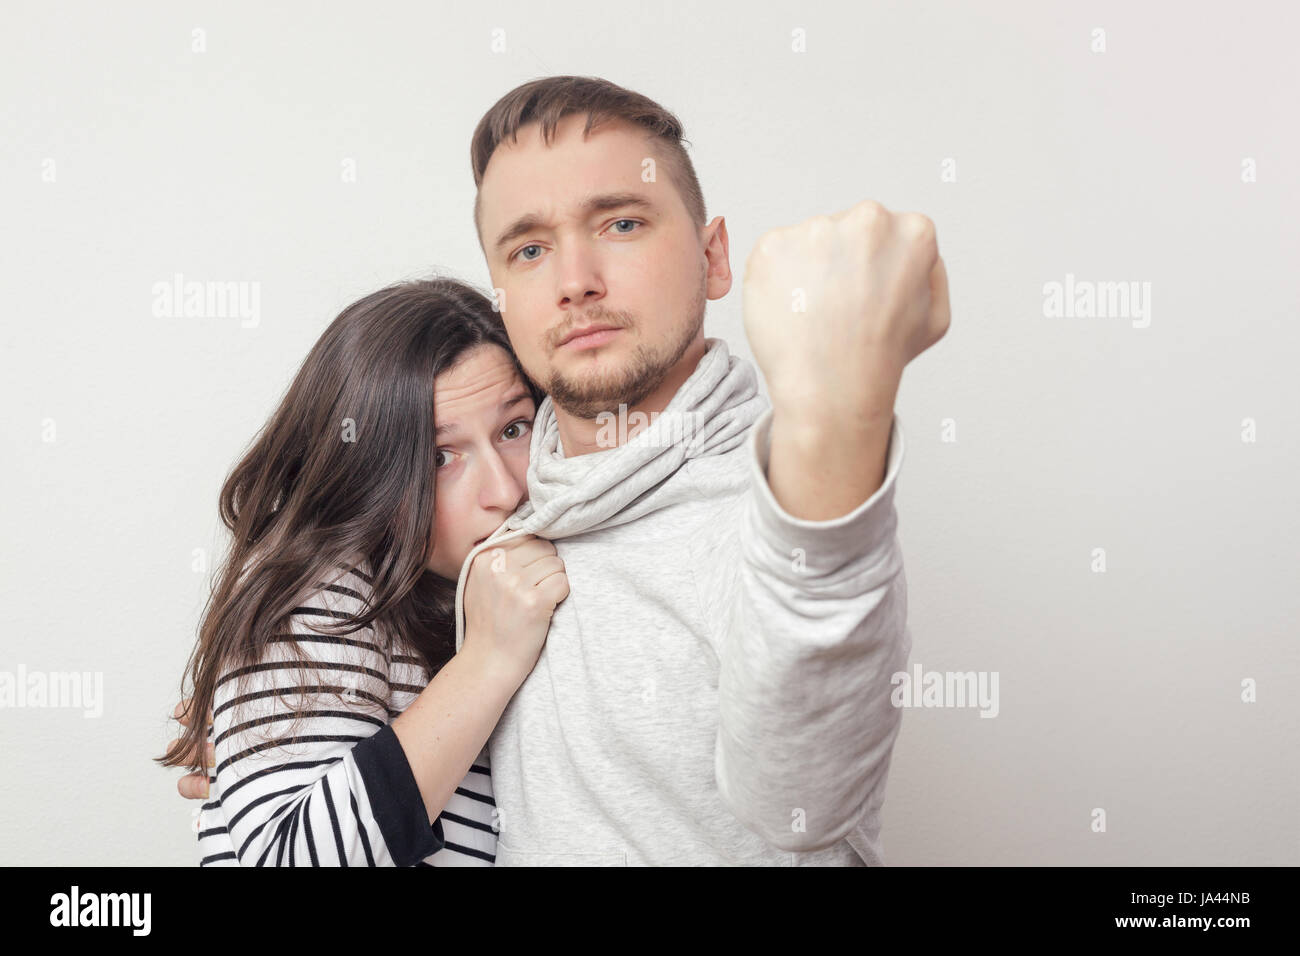 Brave young man protecting his girlfriend. He put his fist forward. She hides in fear behind him Stock Photo